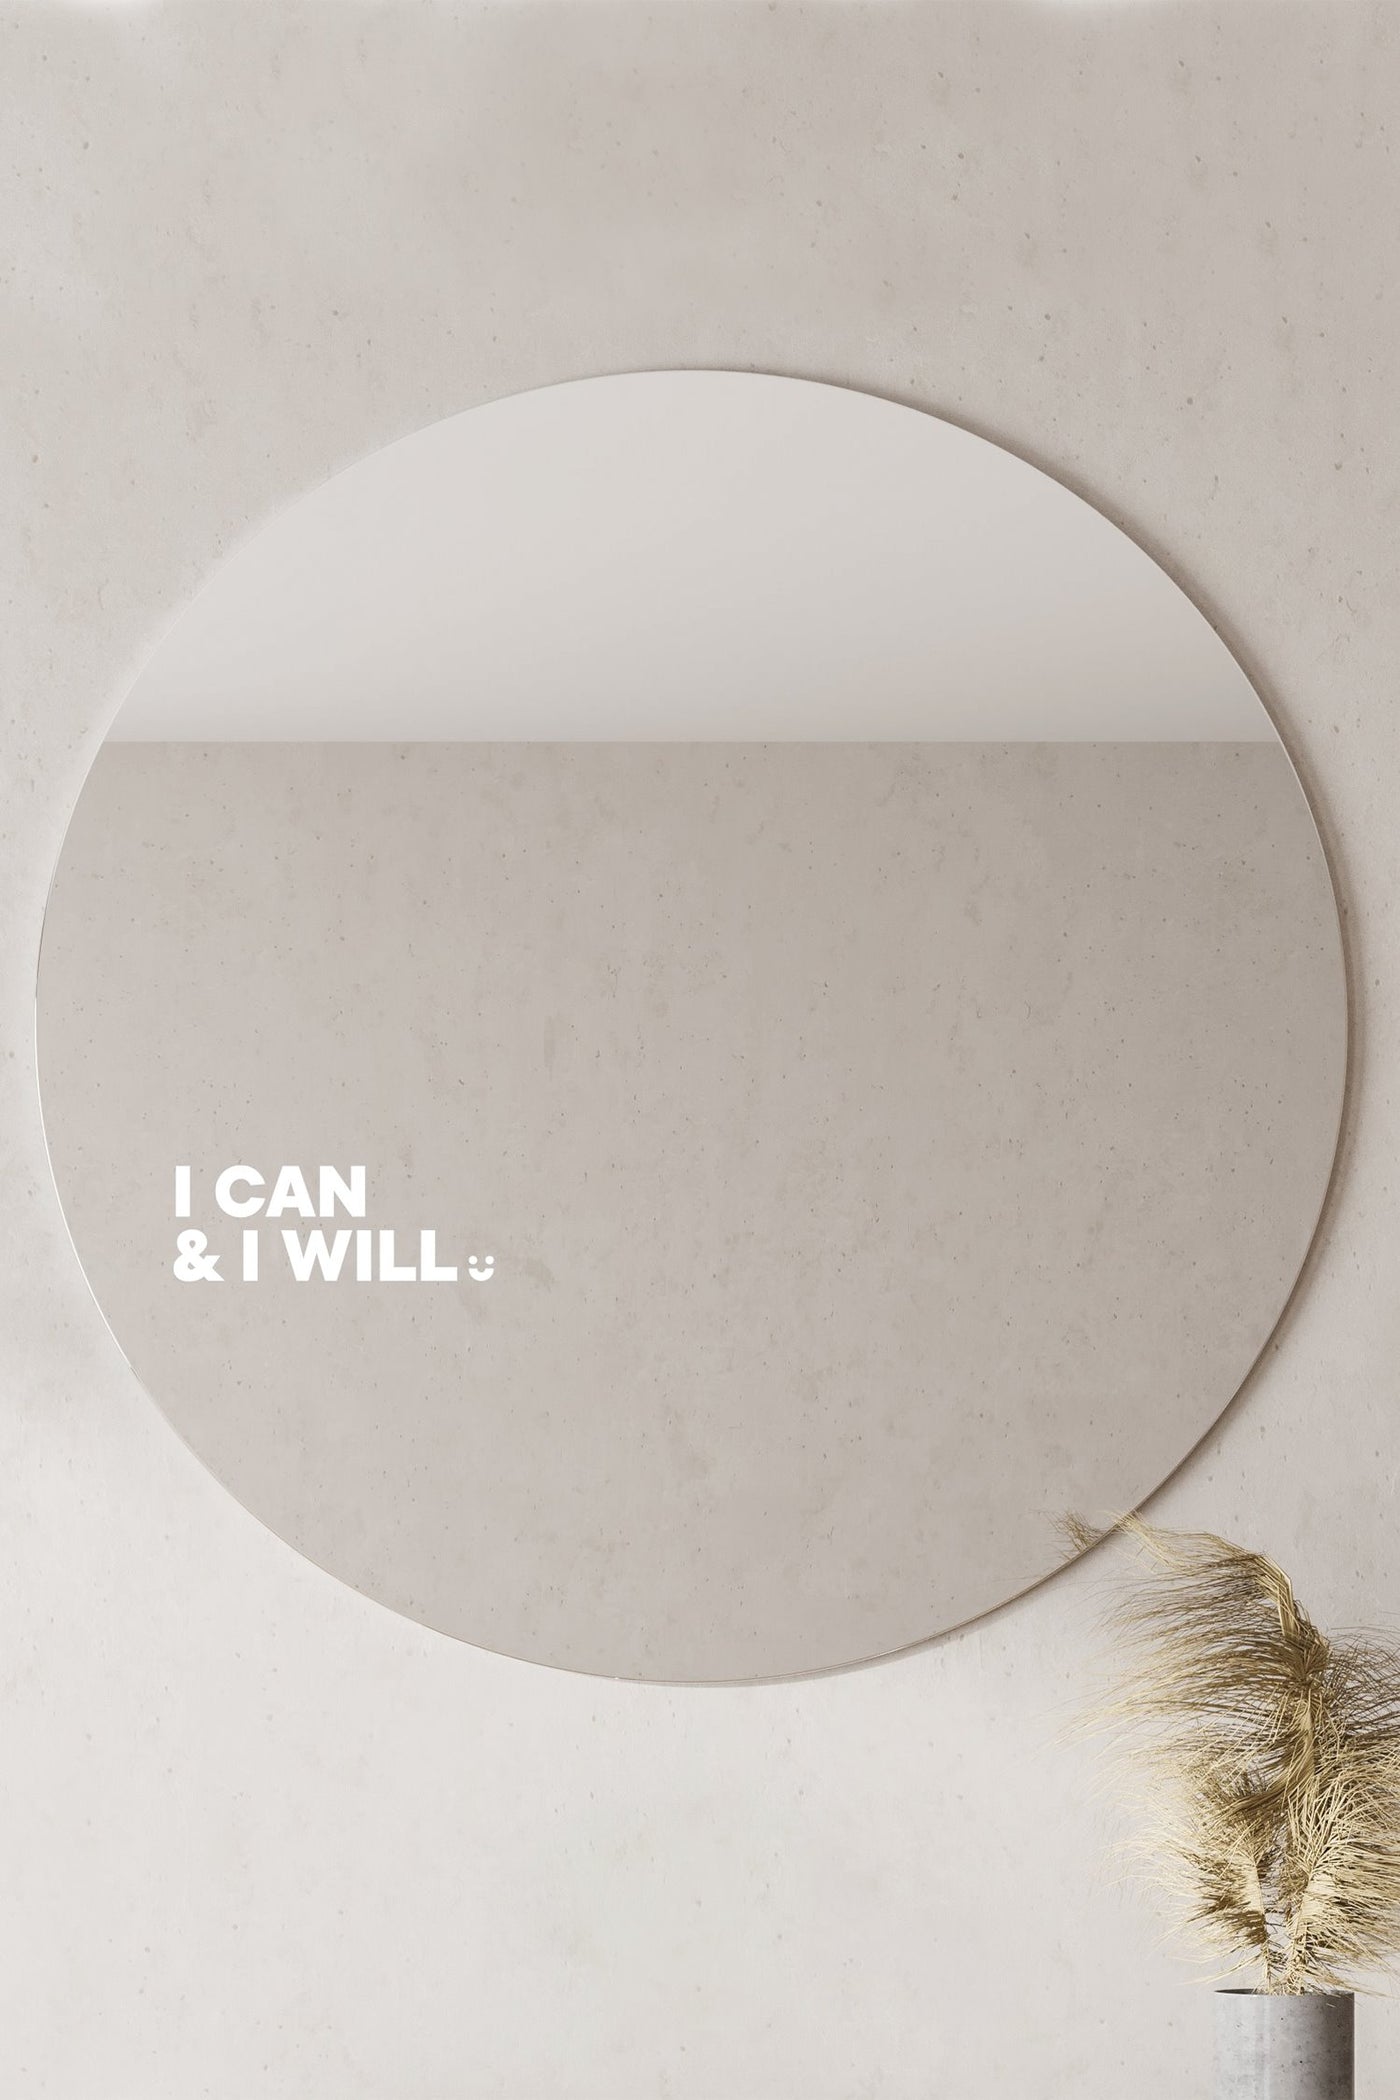 I CAN AND I WILL. - Affirmation Mirror Sticker Affirmation Stickers Selfawear 